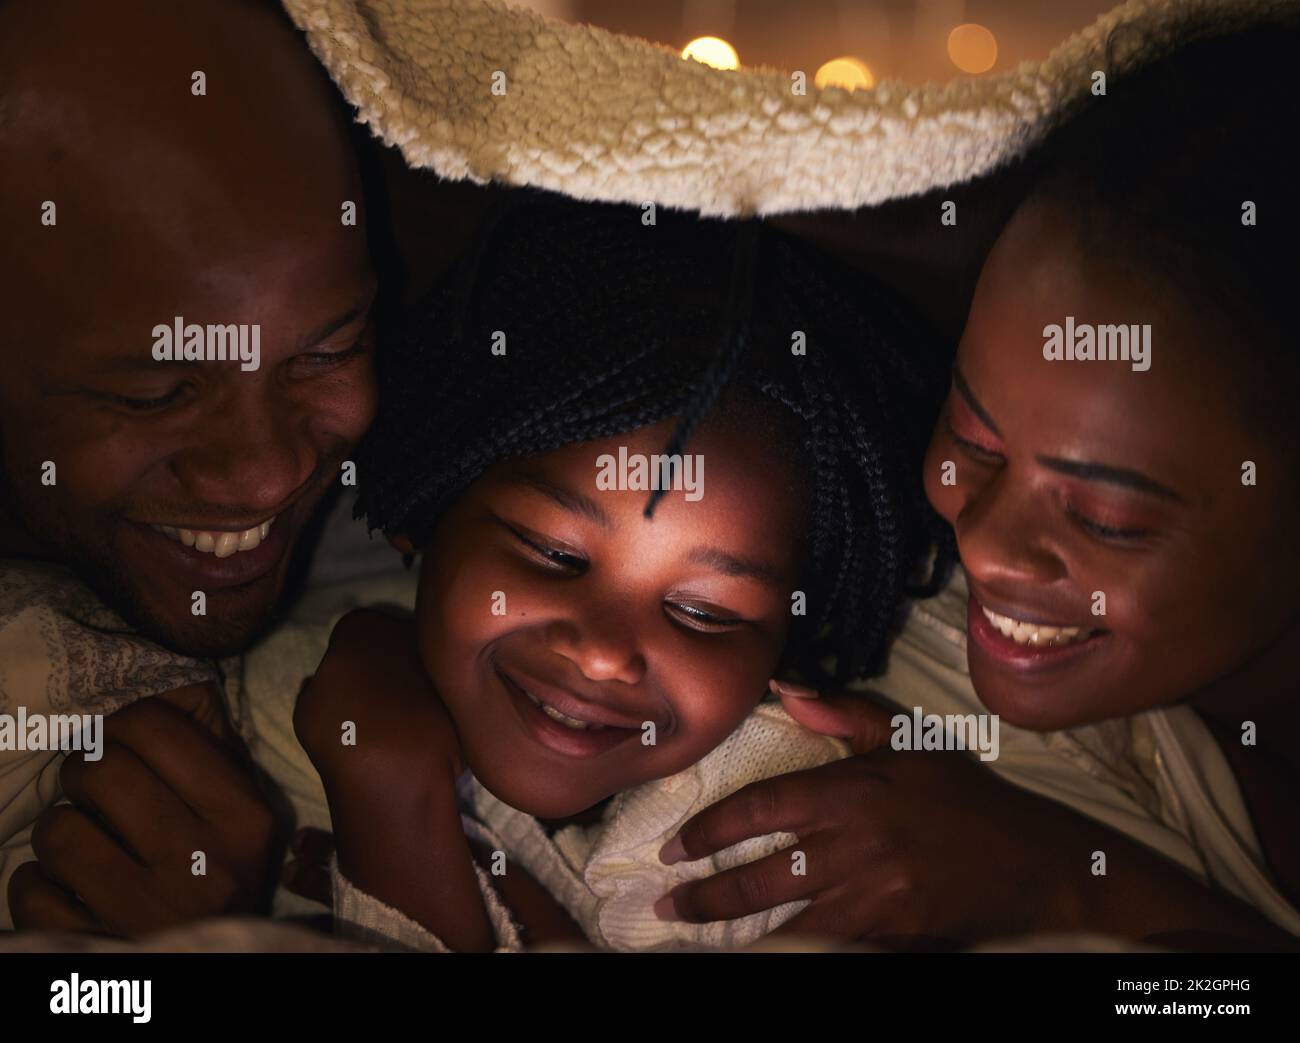 The tiniest moment can create the biggest memory. Shot of a young family bonding at home. Stock Photo